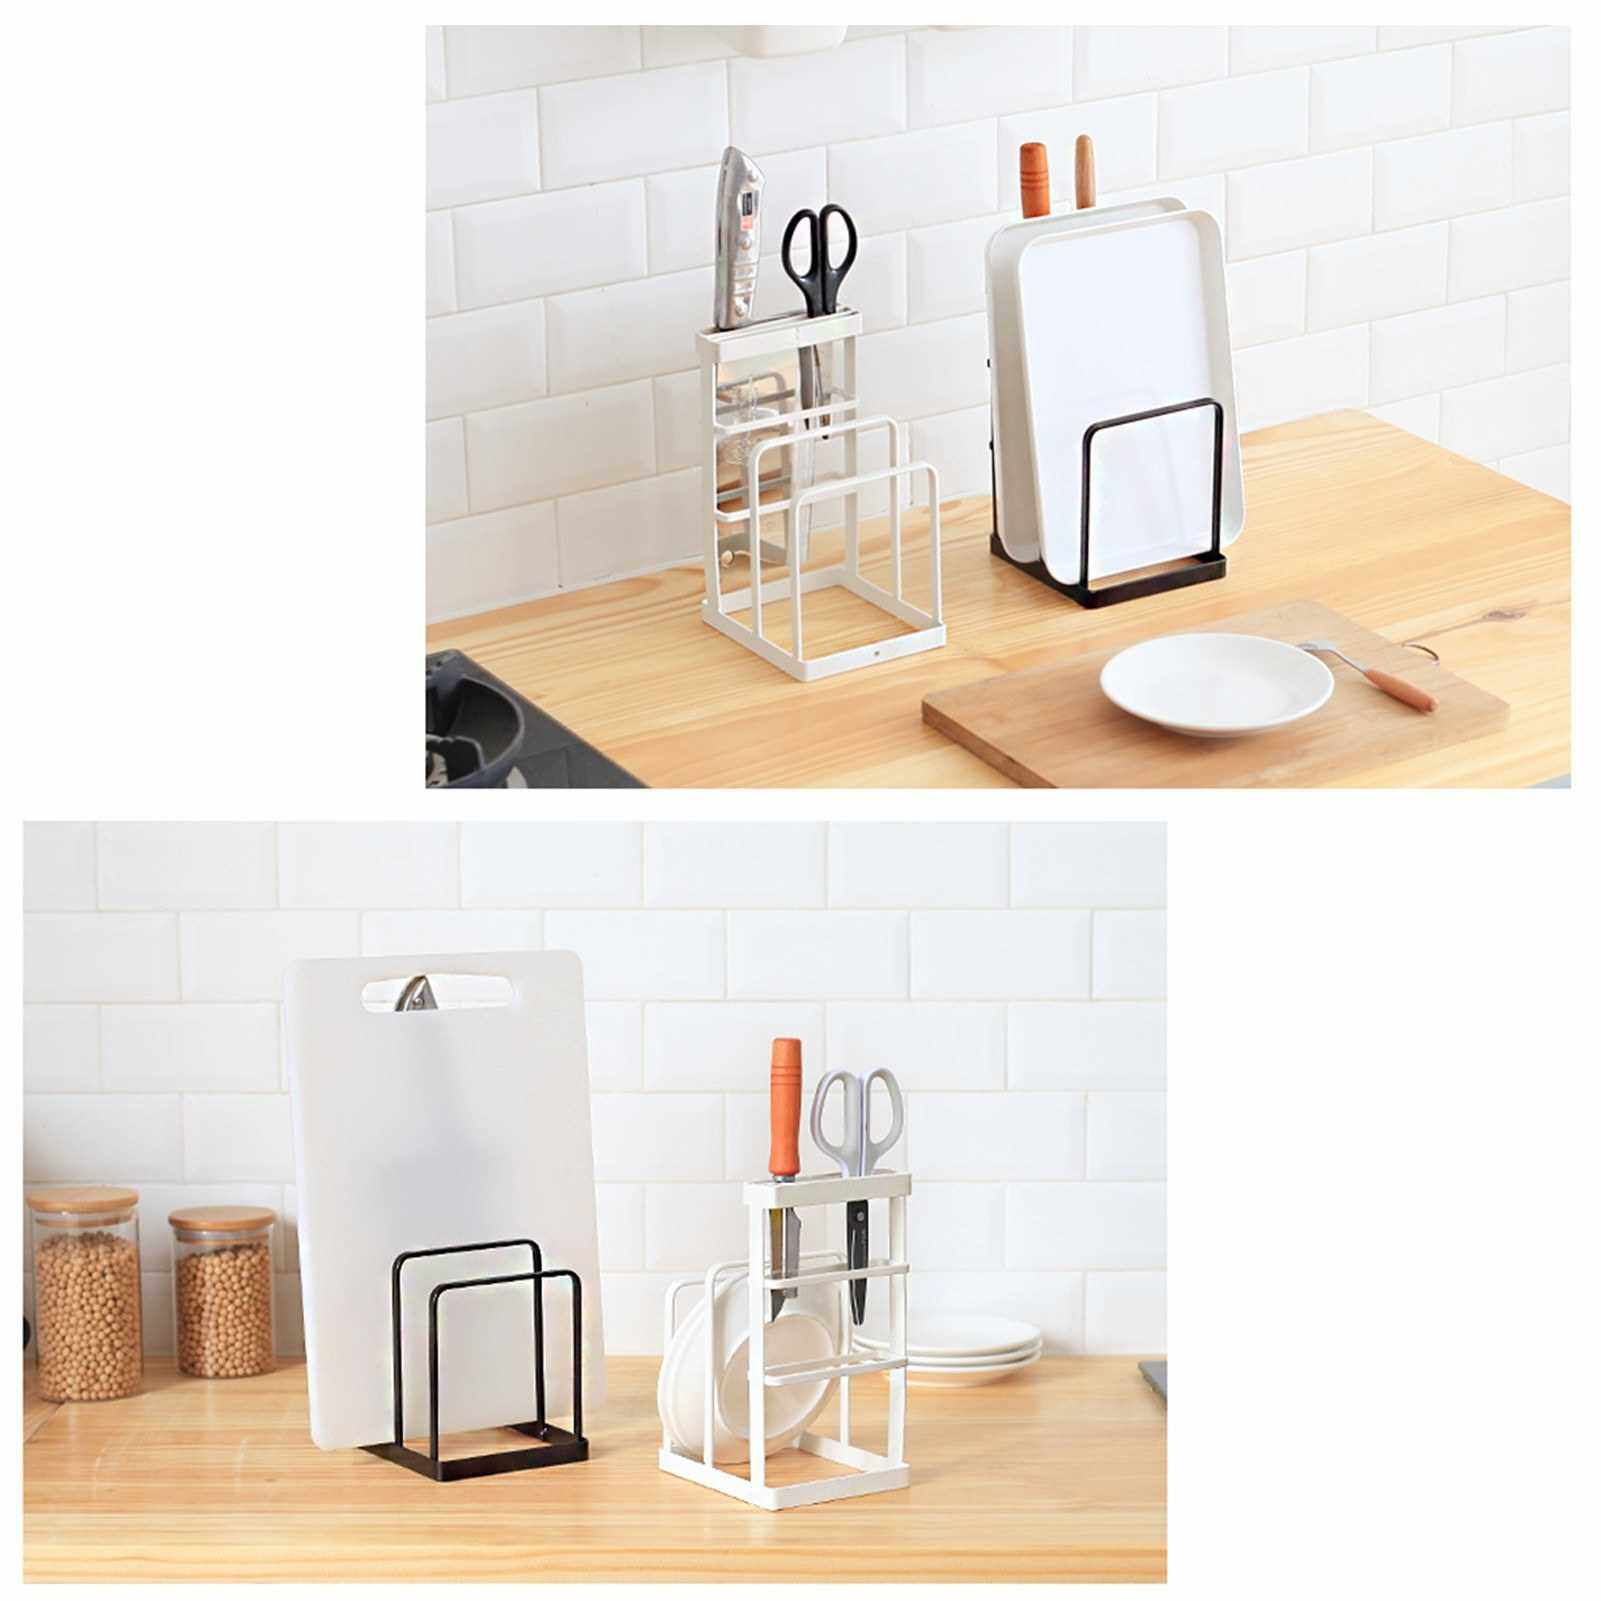 Best Selling Knife Block with Cutting Board Holder Chopping Board Organizer Kitchen Knife Rack Pot Lid Holder Kitchen Drying Rack Pot Cover Storage Stand Kitchen Countertop Organizer (Brown)